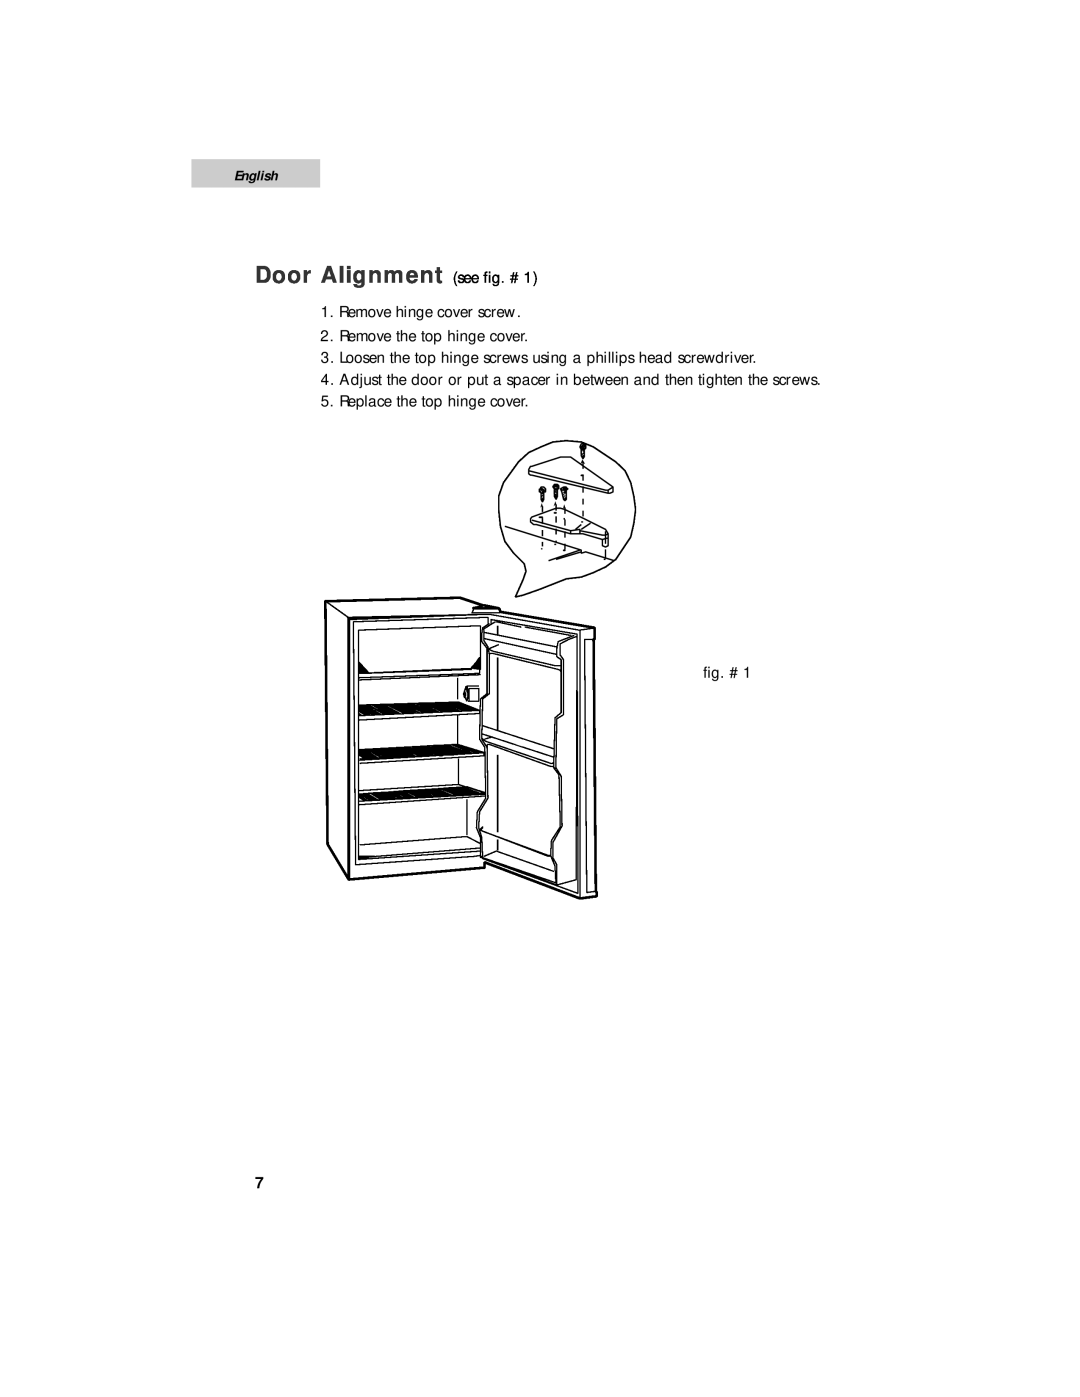 Haier HSE01WNA user manual Door Alignment see fig. #, English, Remove hinge cover screw, Remove the top hinge cover 